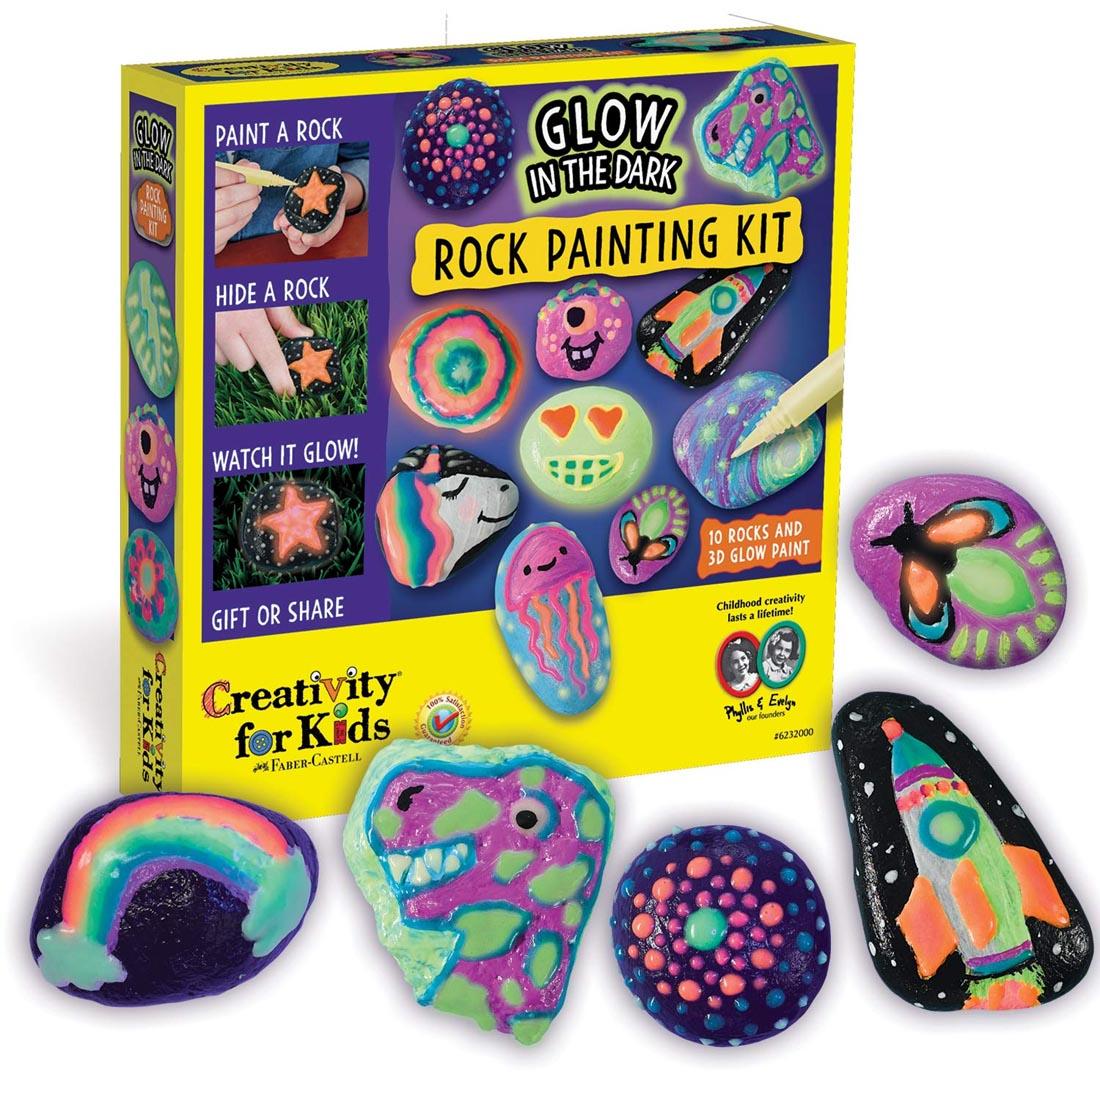 Glow In The Dark Rock Painting Kit with sample painted rocks